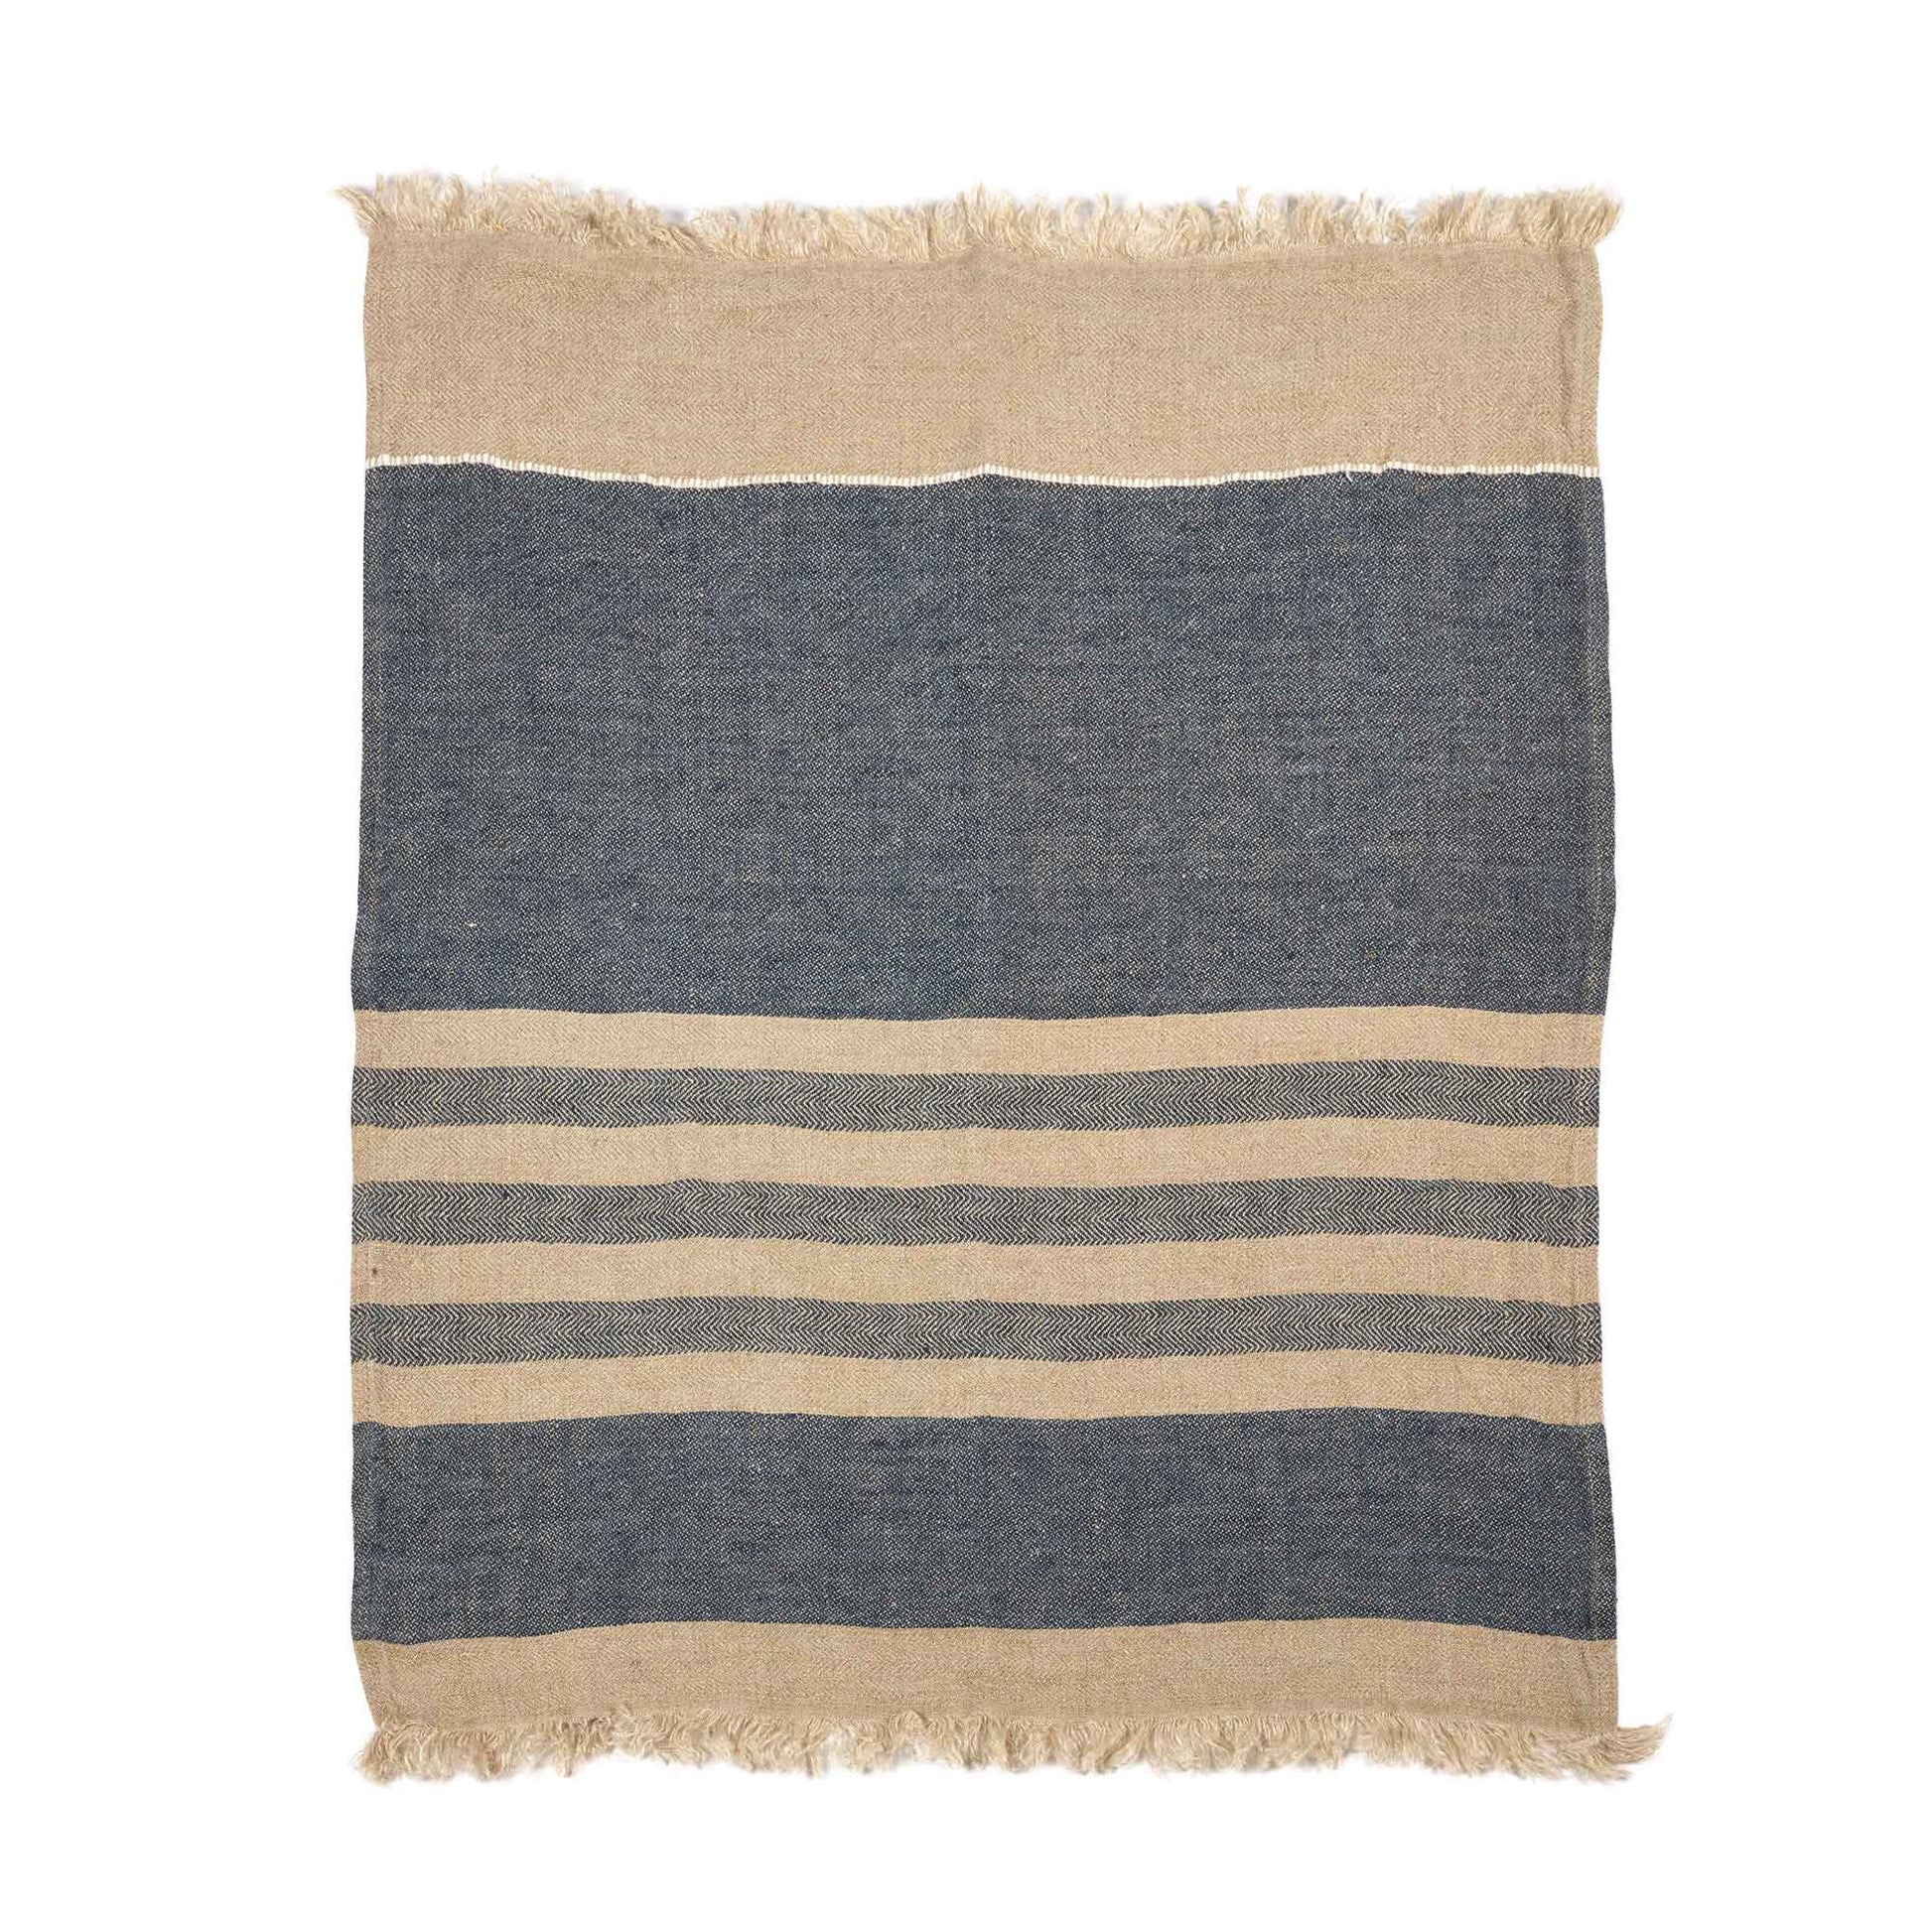 Belgian linen fouta throw blanket flat lay product shot in color Sea Stripe by Libeco for South Hous.